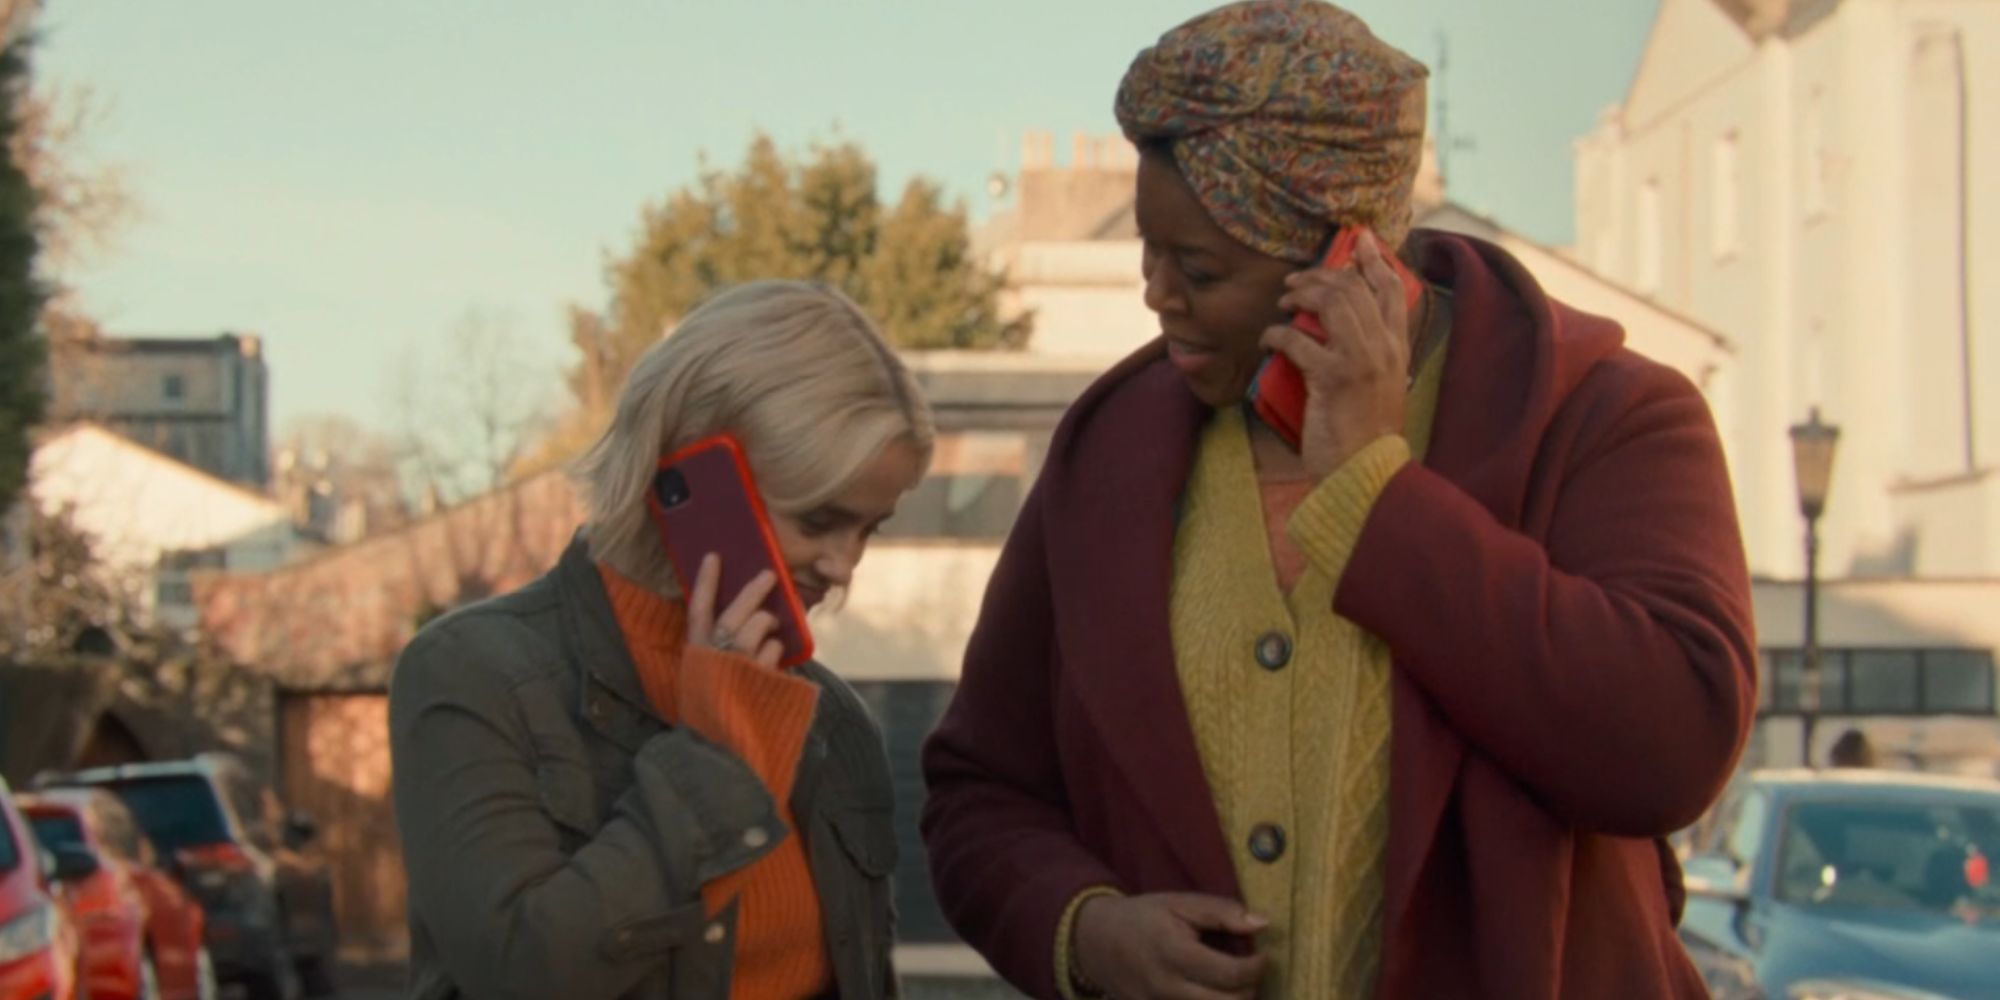 Ruby talking to her mother on the phone as they stand right next to each other in Doctor Who